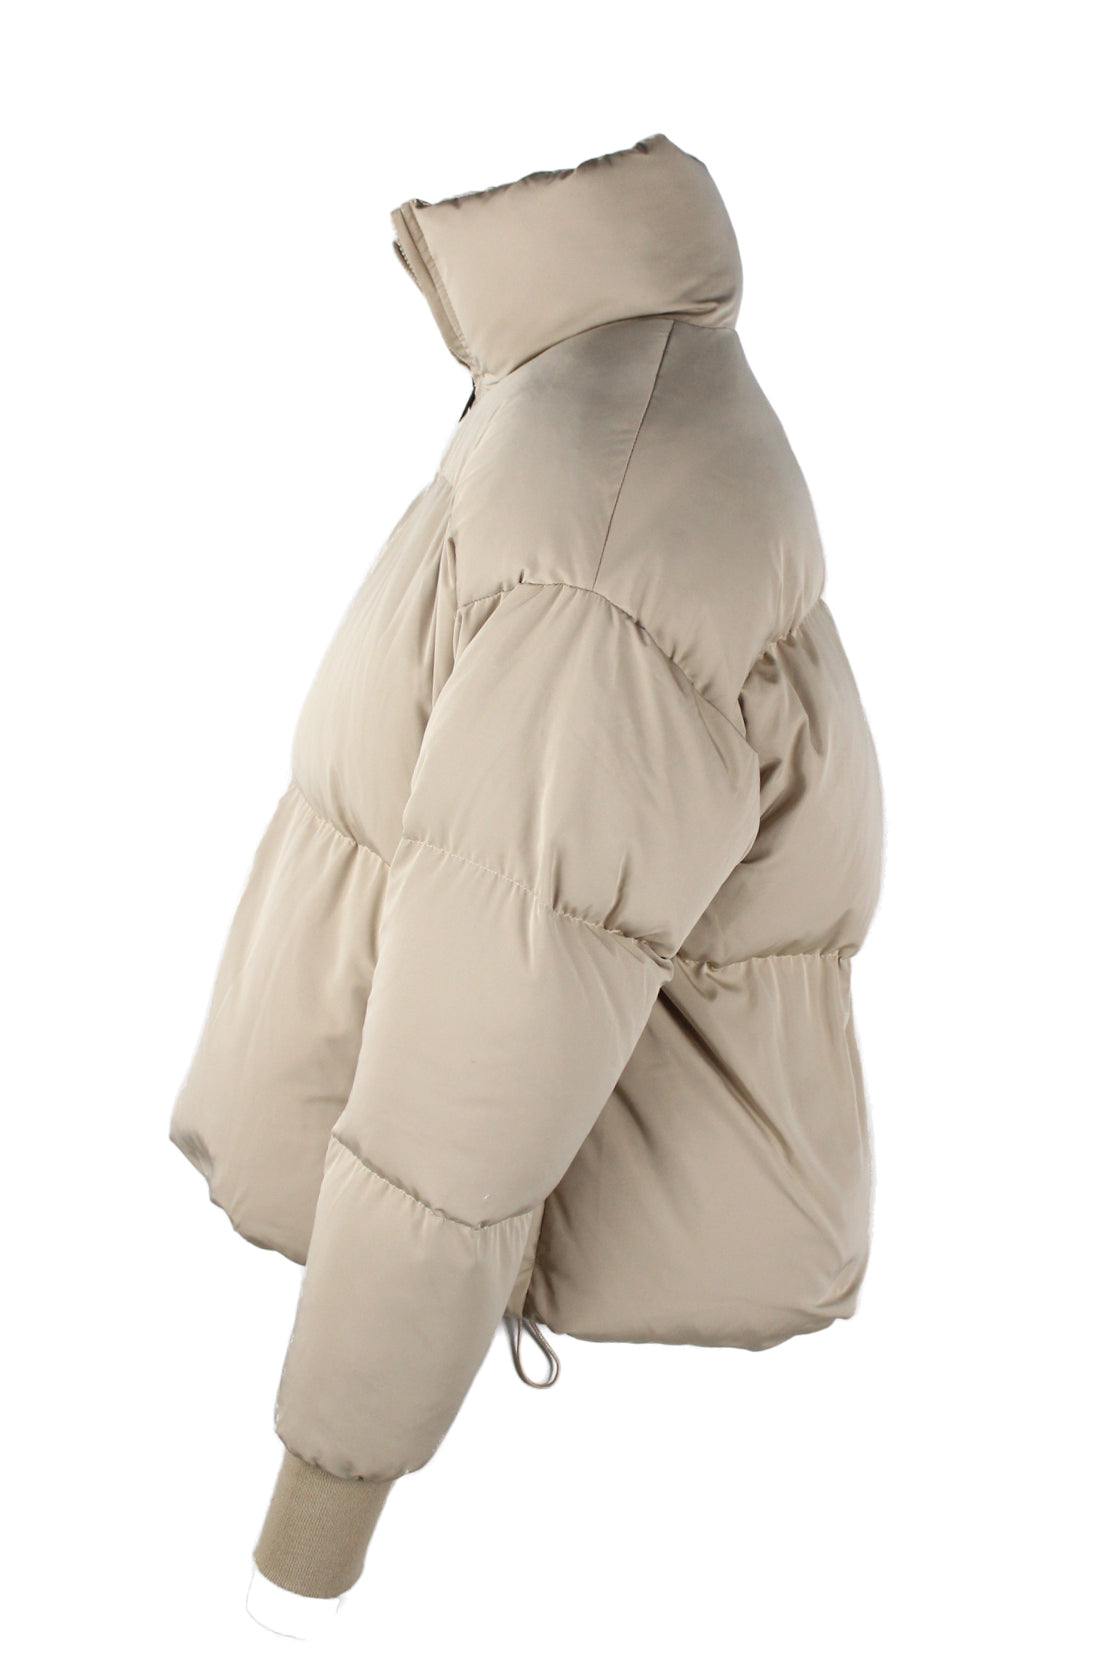 profile view with left sleeve of jacket.